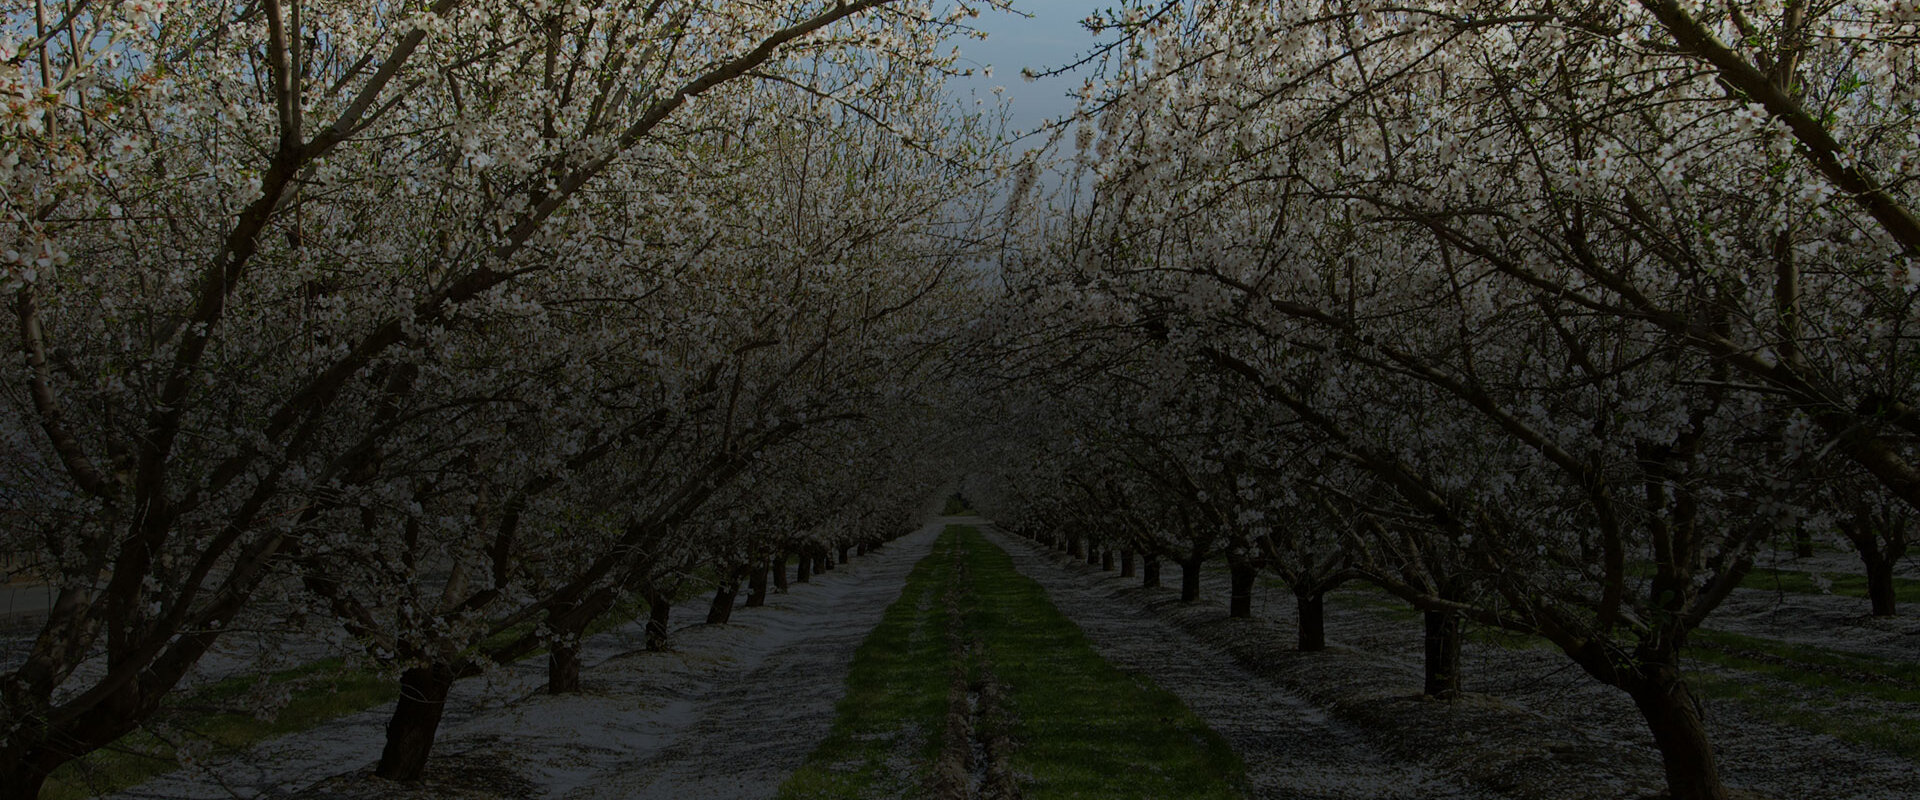 Almond trees in the central valley